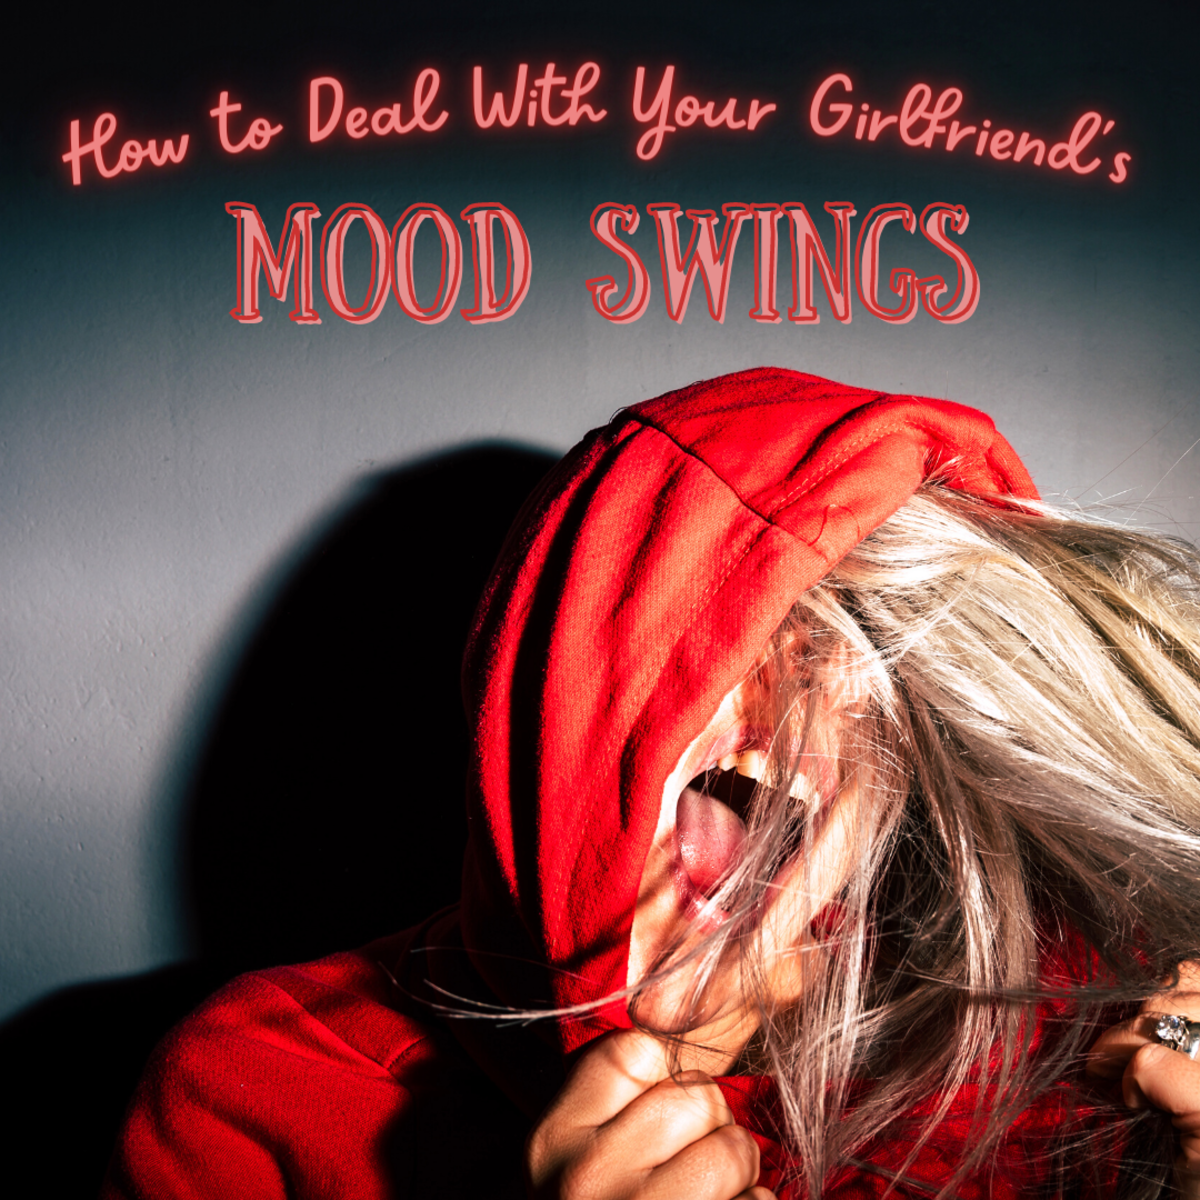 How should you deal with your partner's mood swings? Read on to find out!